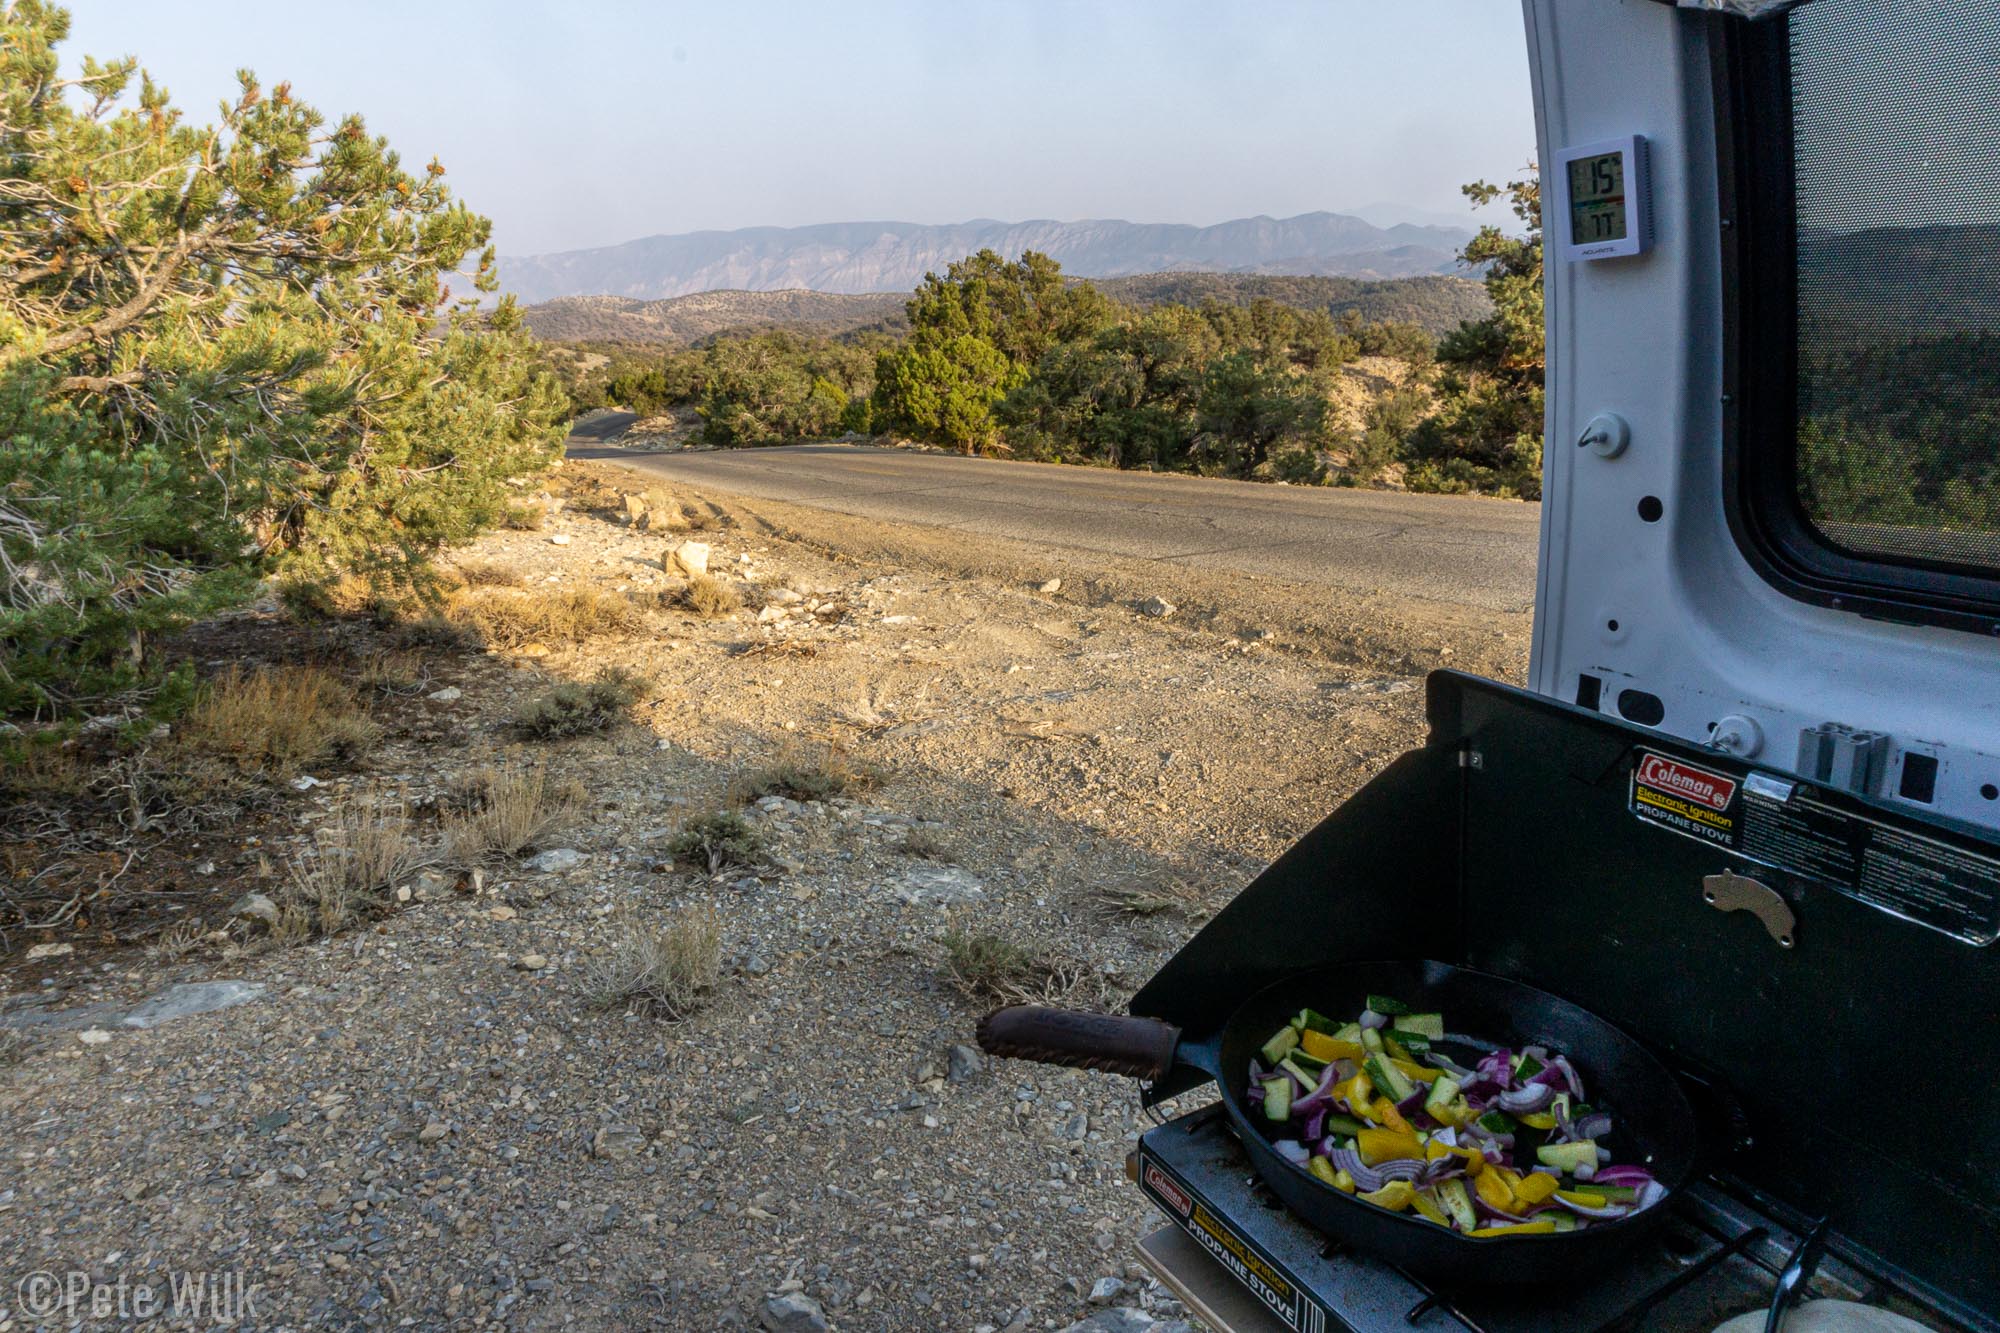 Making dinner by the side of the road before starting the drive home.